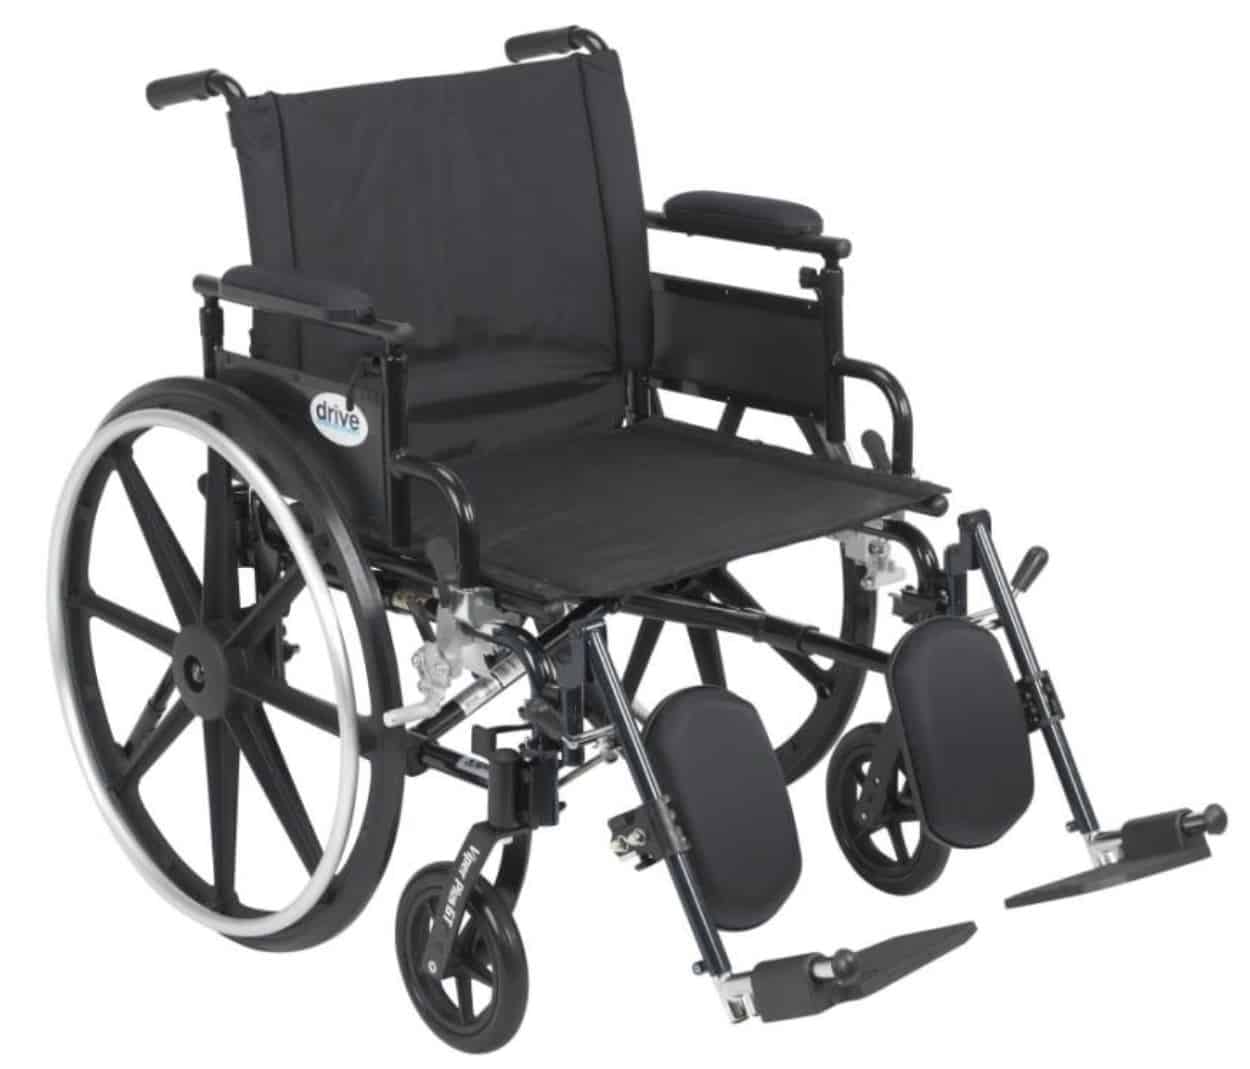 Medicare approved manual wheelchair.